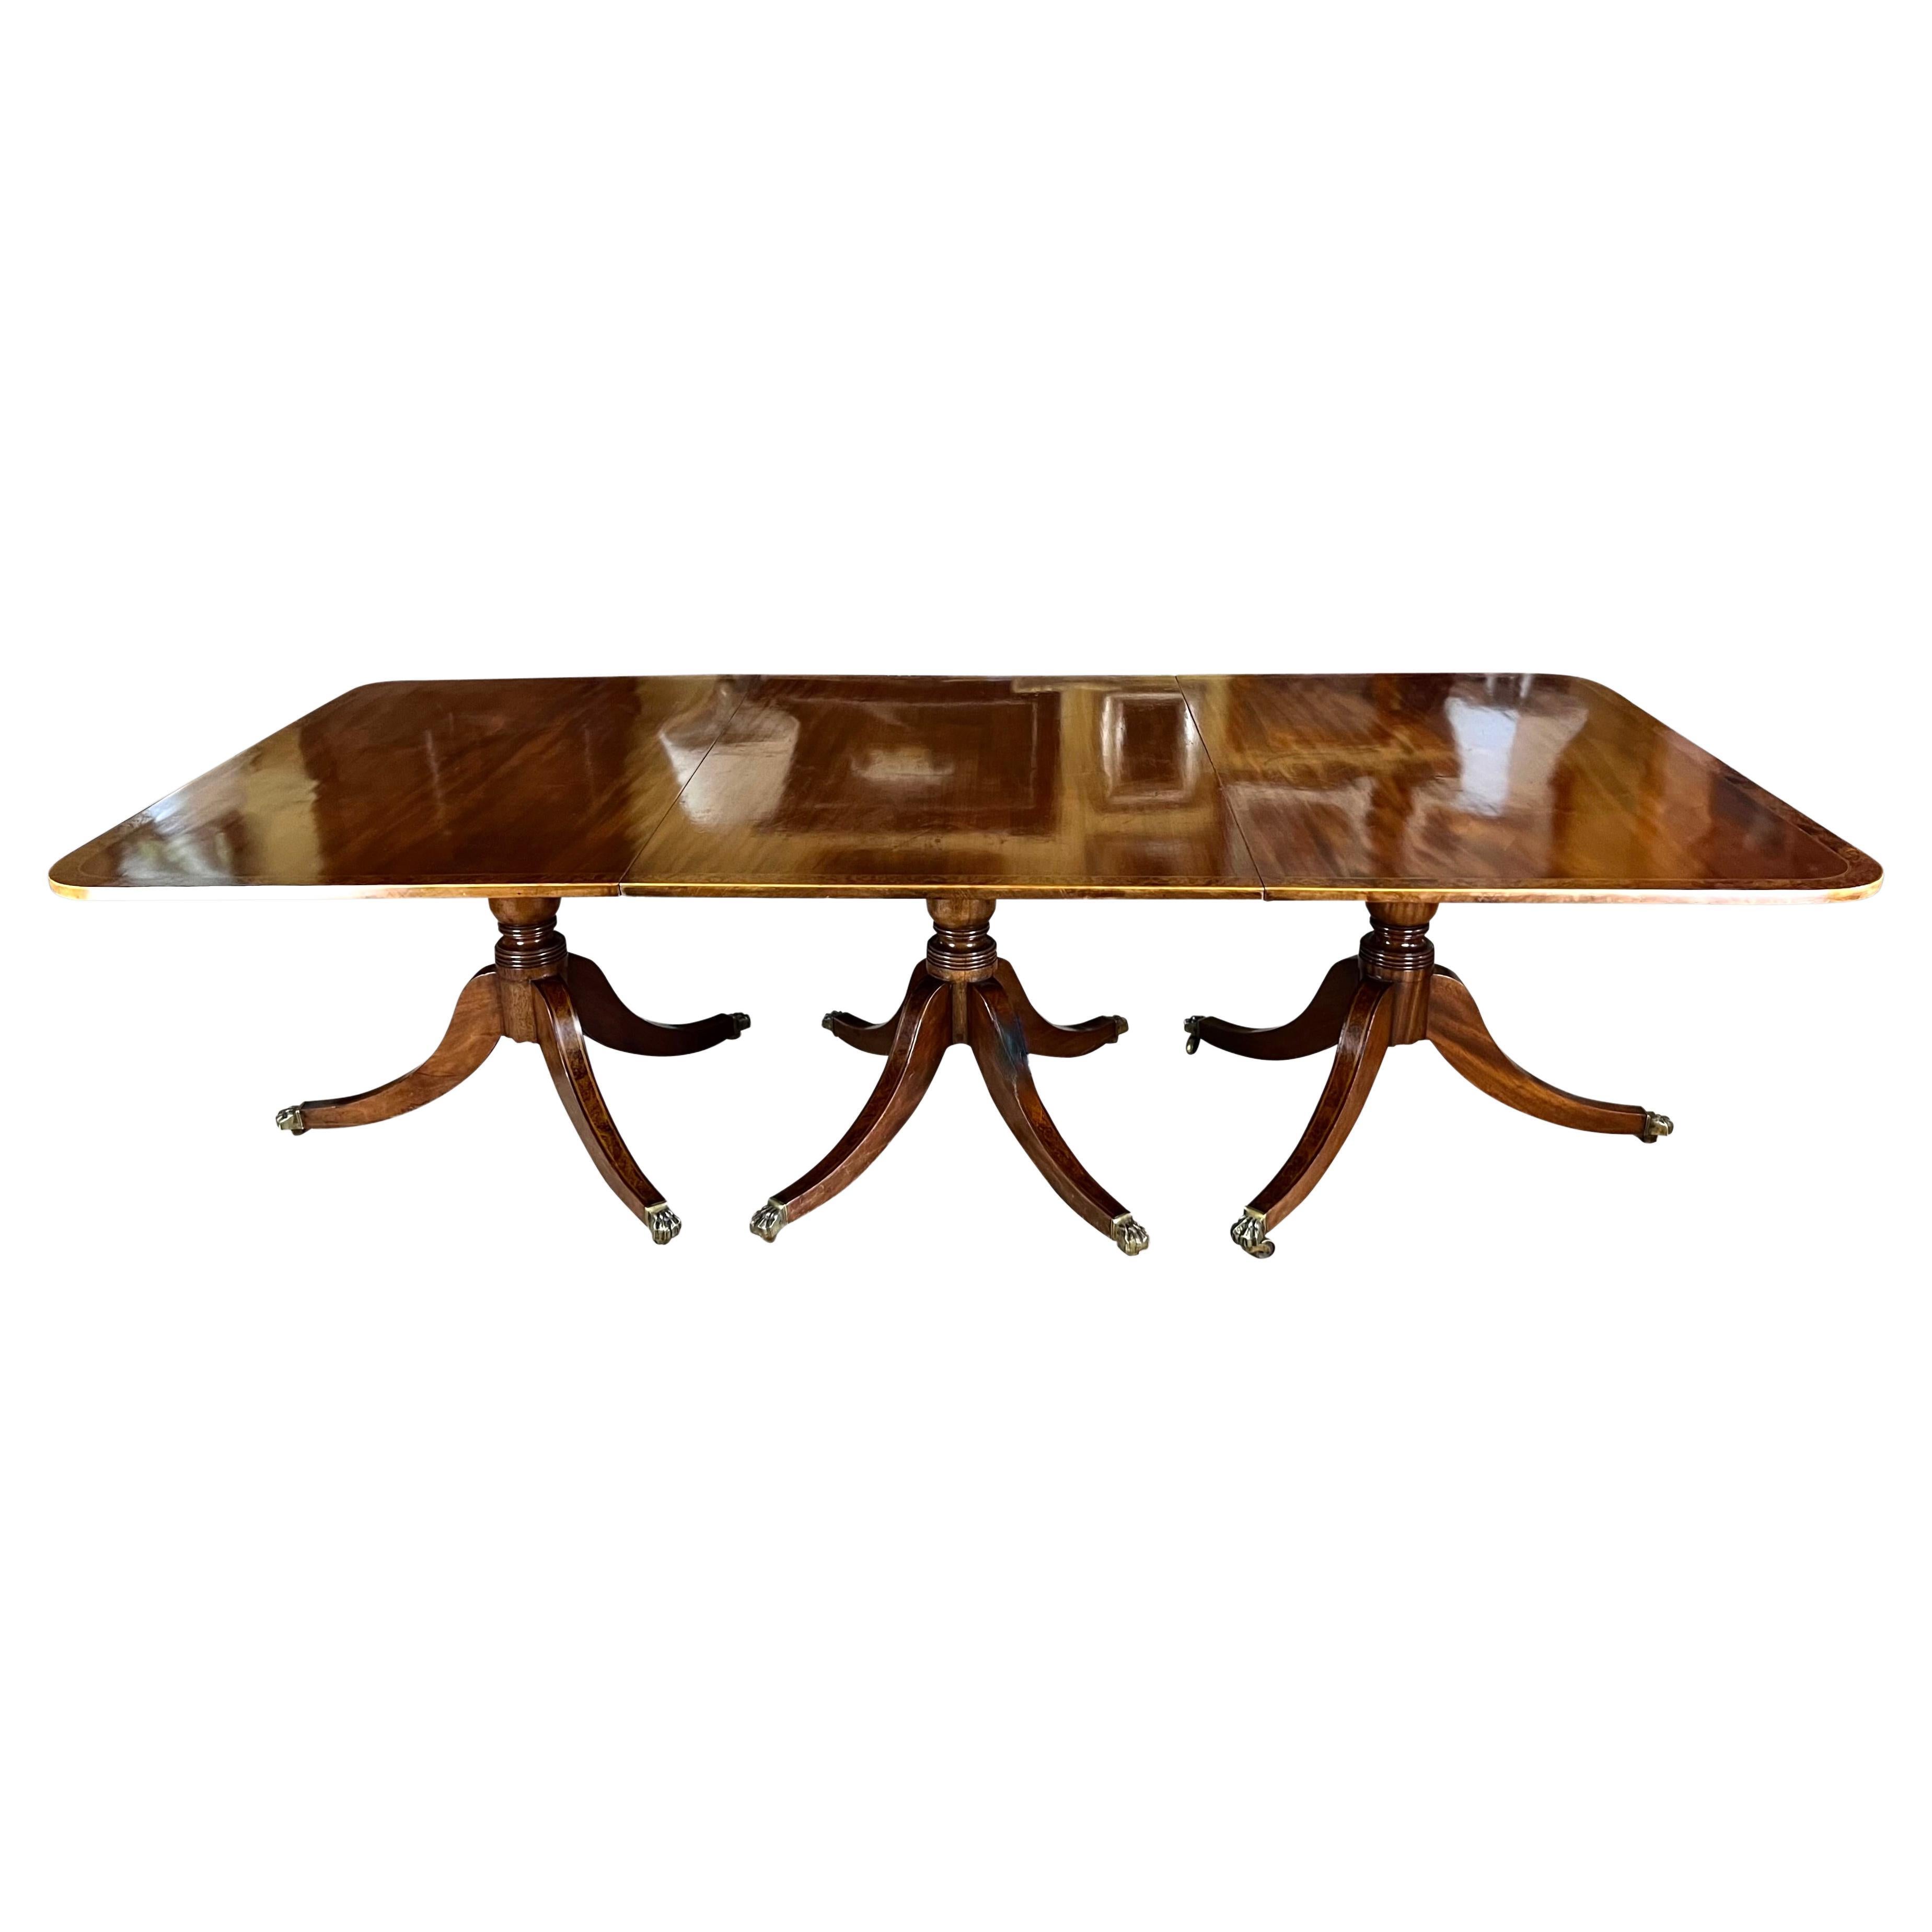 Georgian Style Burl Elm Crossbanded Mahogany 3 Pedestal Dining Table with Leaves For Sale